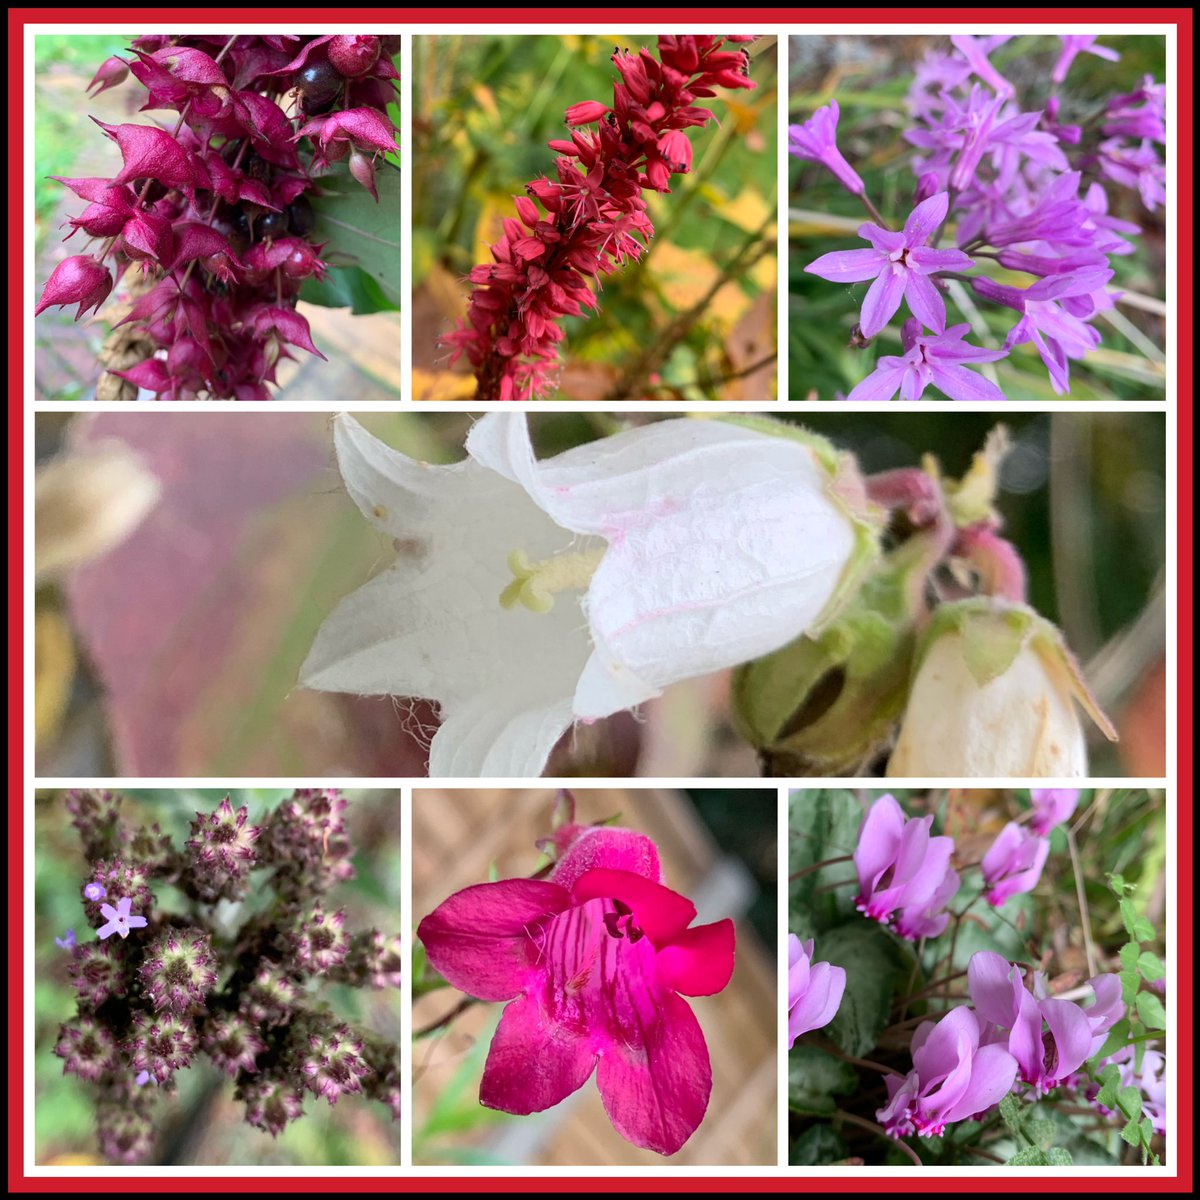 Finally back from work! Time for a sit down and a rum coffee ☕️ Hope you all had a good Sunday  whether a day of remembrance or day of celebration ❤️ Here is my #SevenOnSunday from todays garden. Love to you all! #GardeningTwitter #GardeningX #Remembrance2023 #Diwali